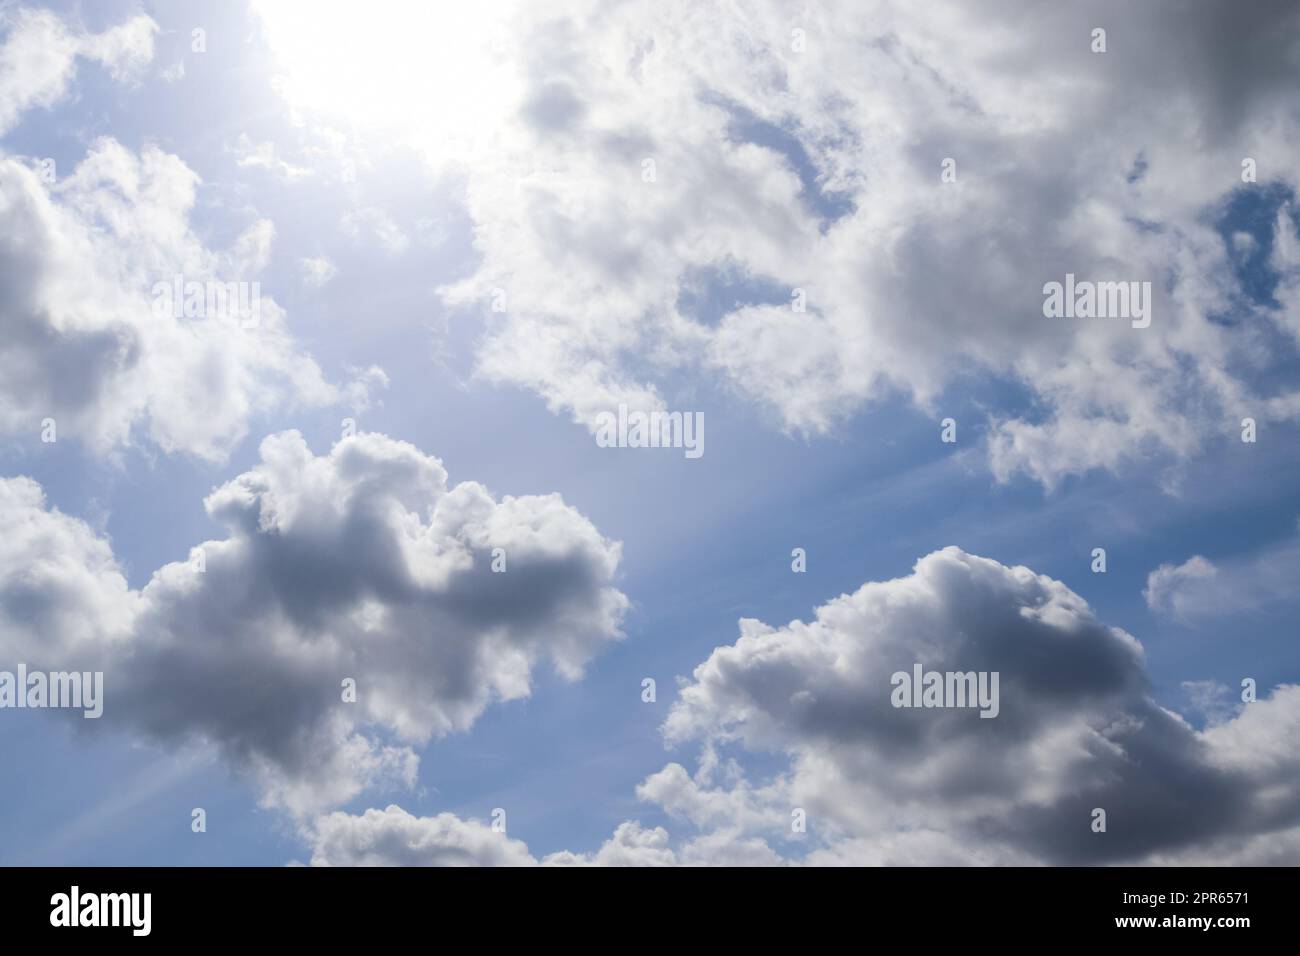 Beautiful view at sunbeams with some lens flares and clouds in a blue sky Stock Photo